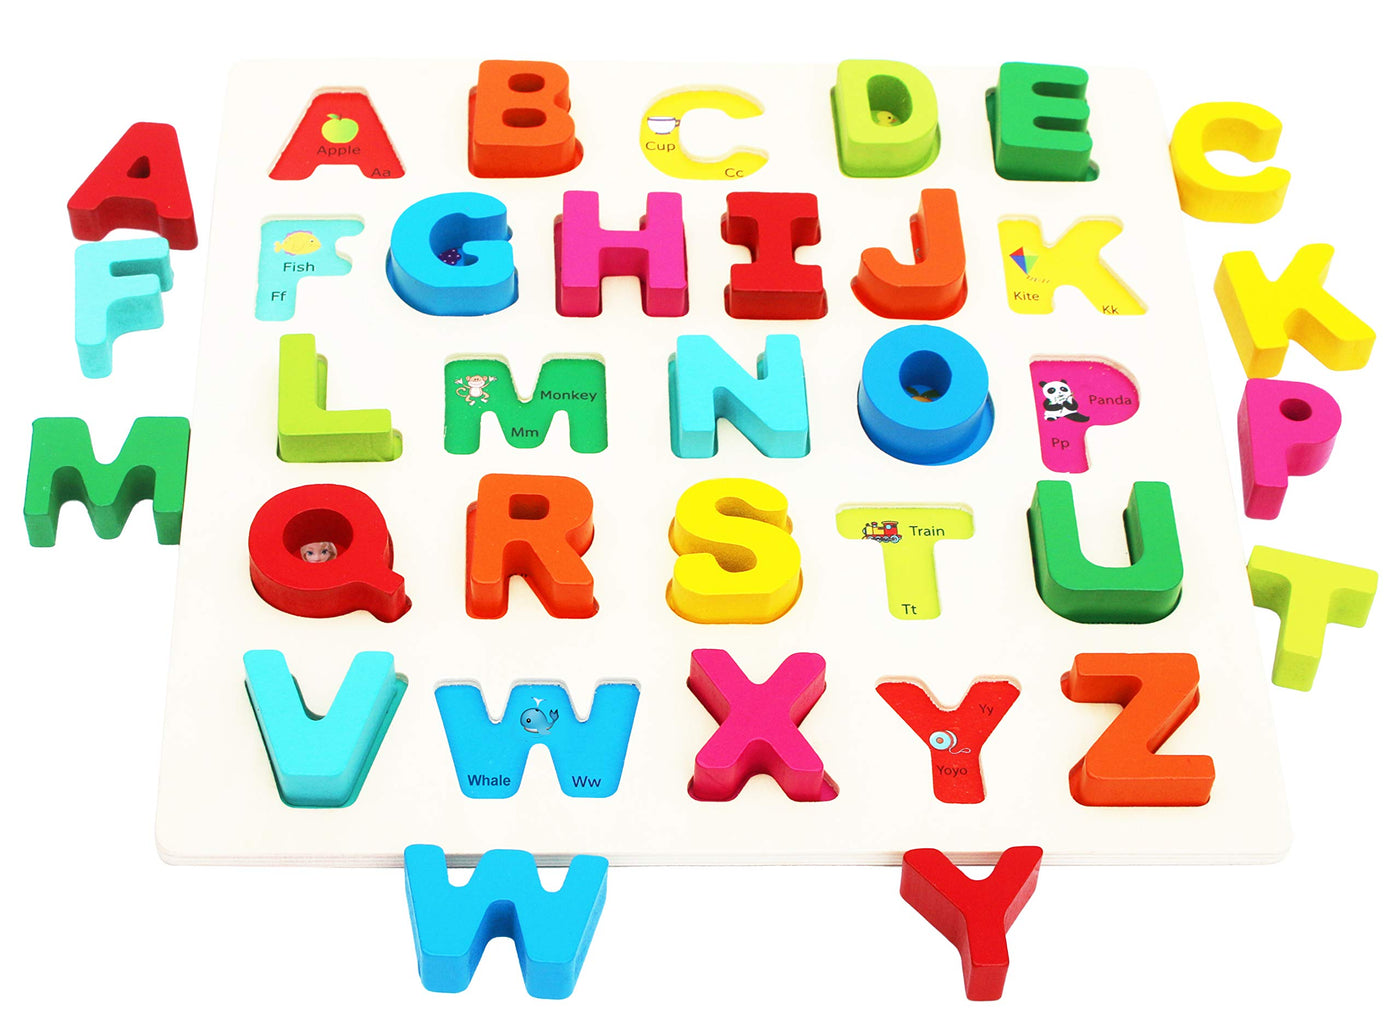 Wooden alphabet toy for toddlers - game board with large letters and English vocabulary - wooden puzzle